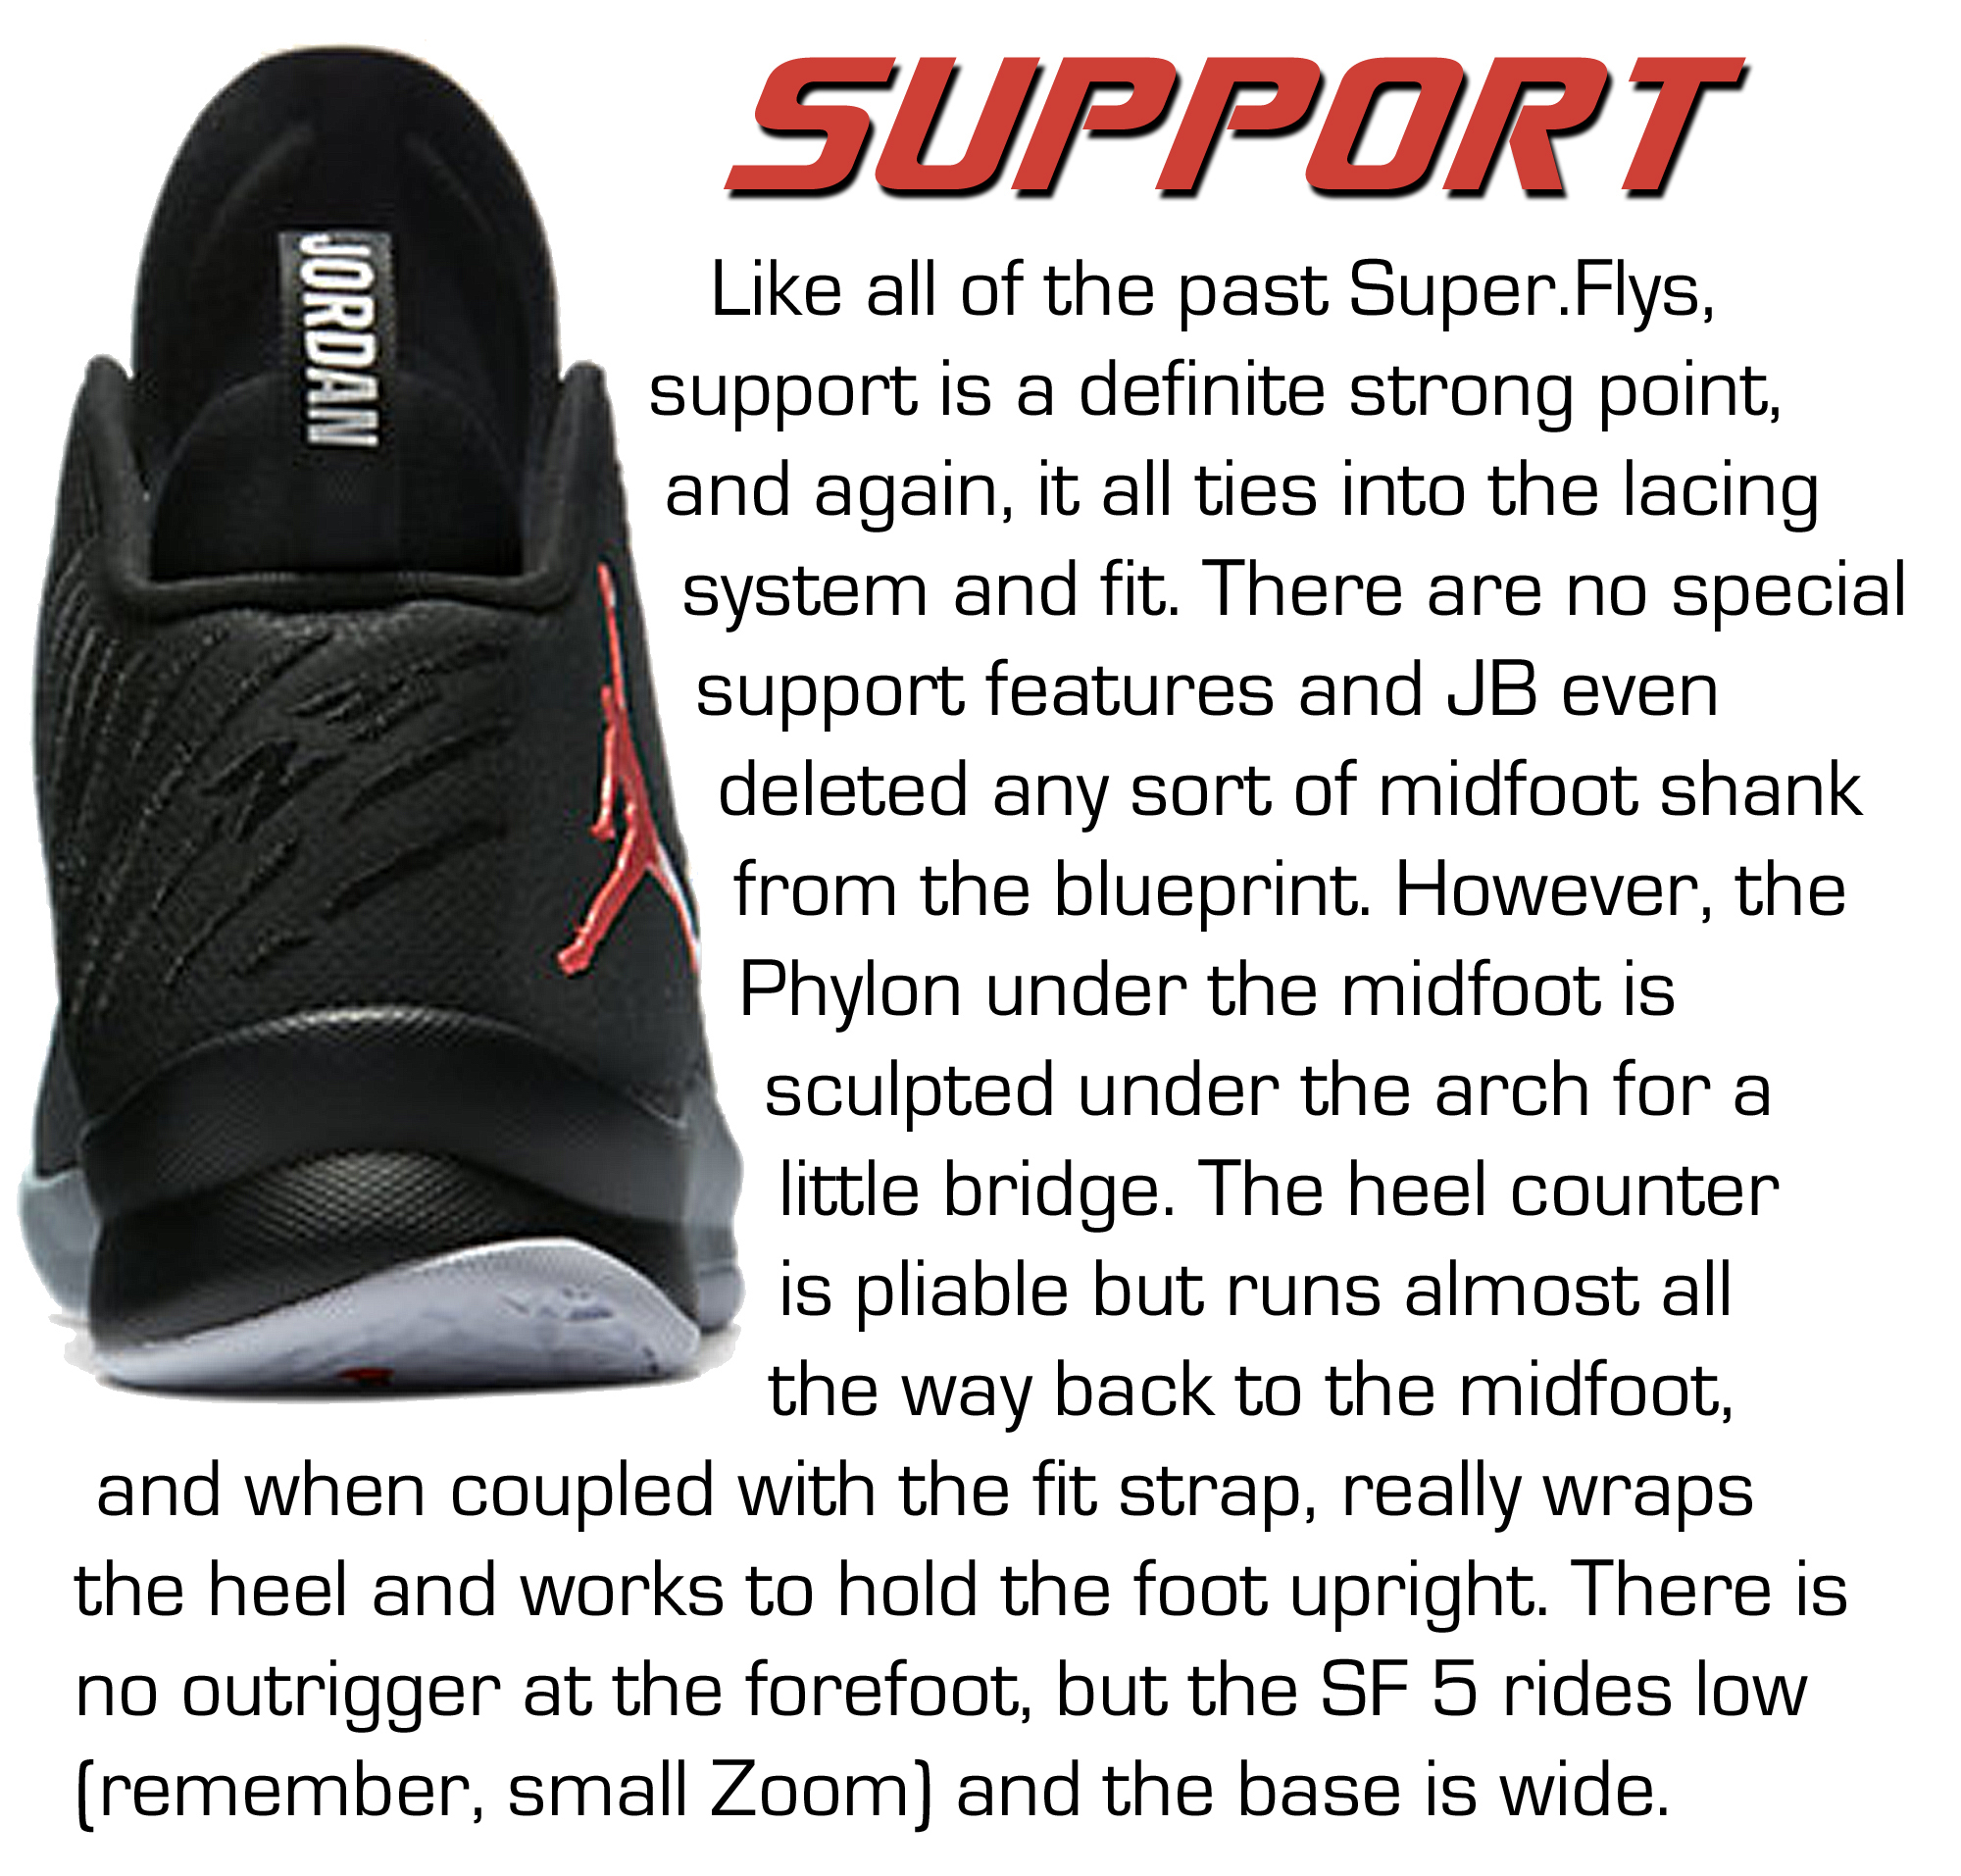 Super.Fly 5 - Support